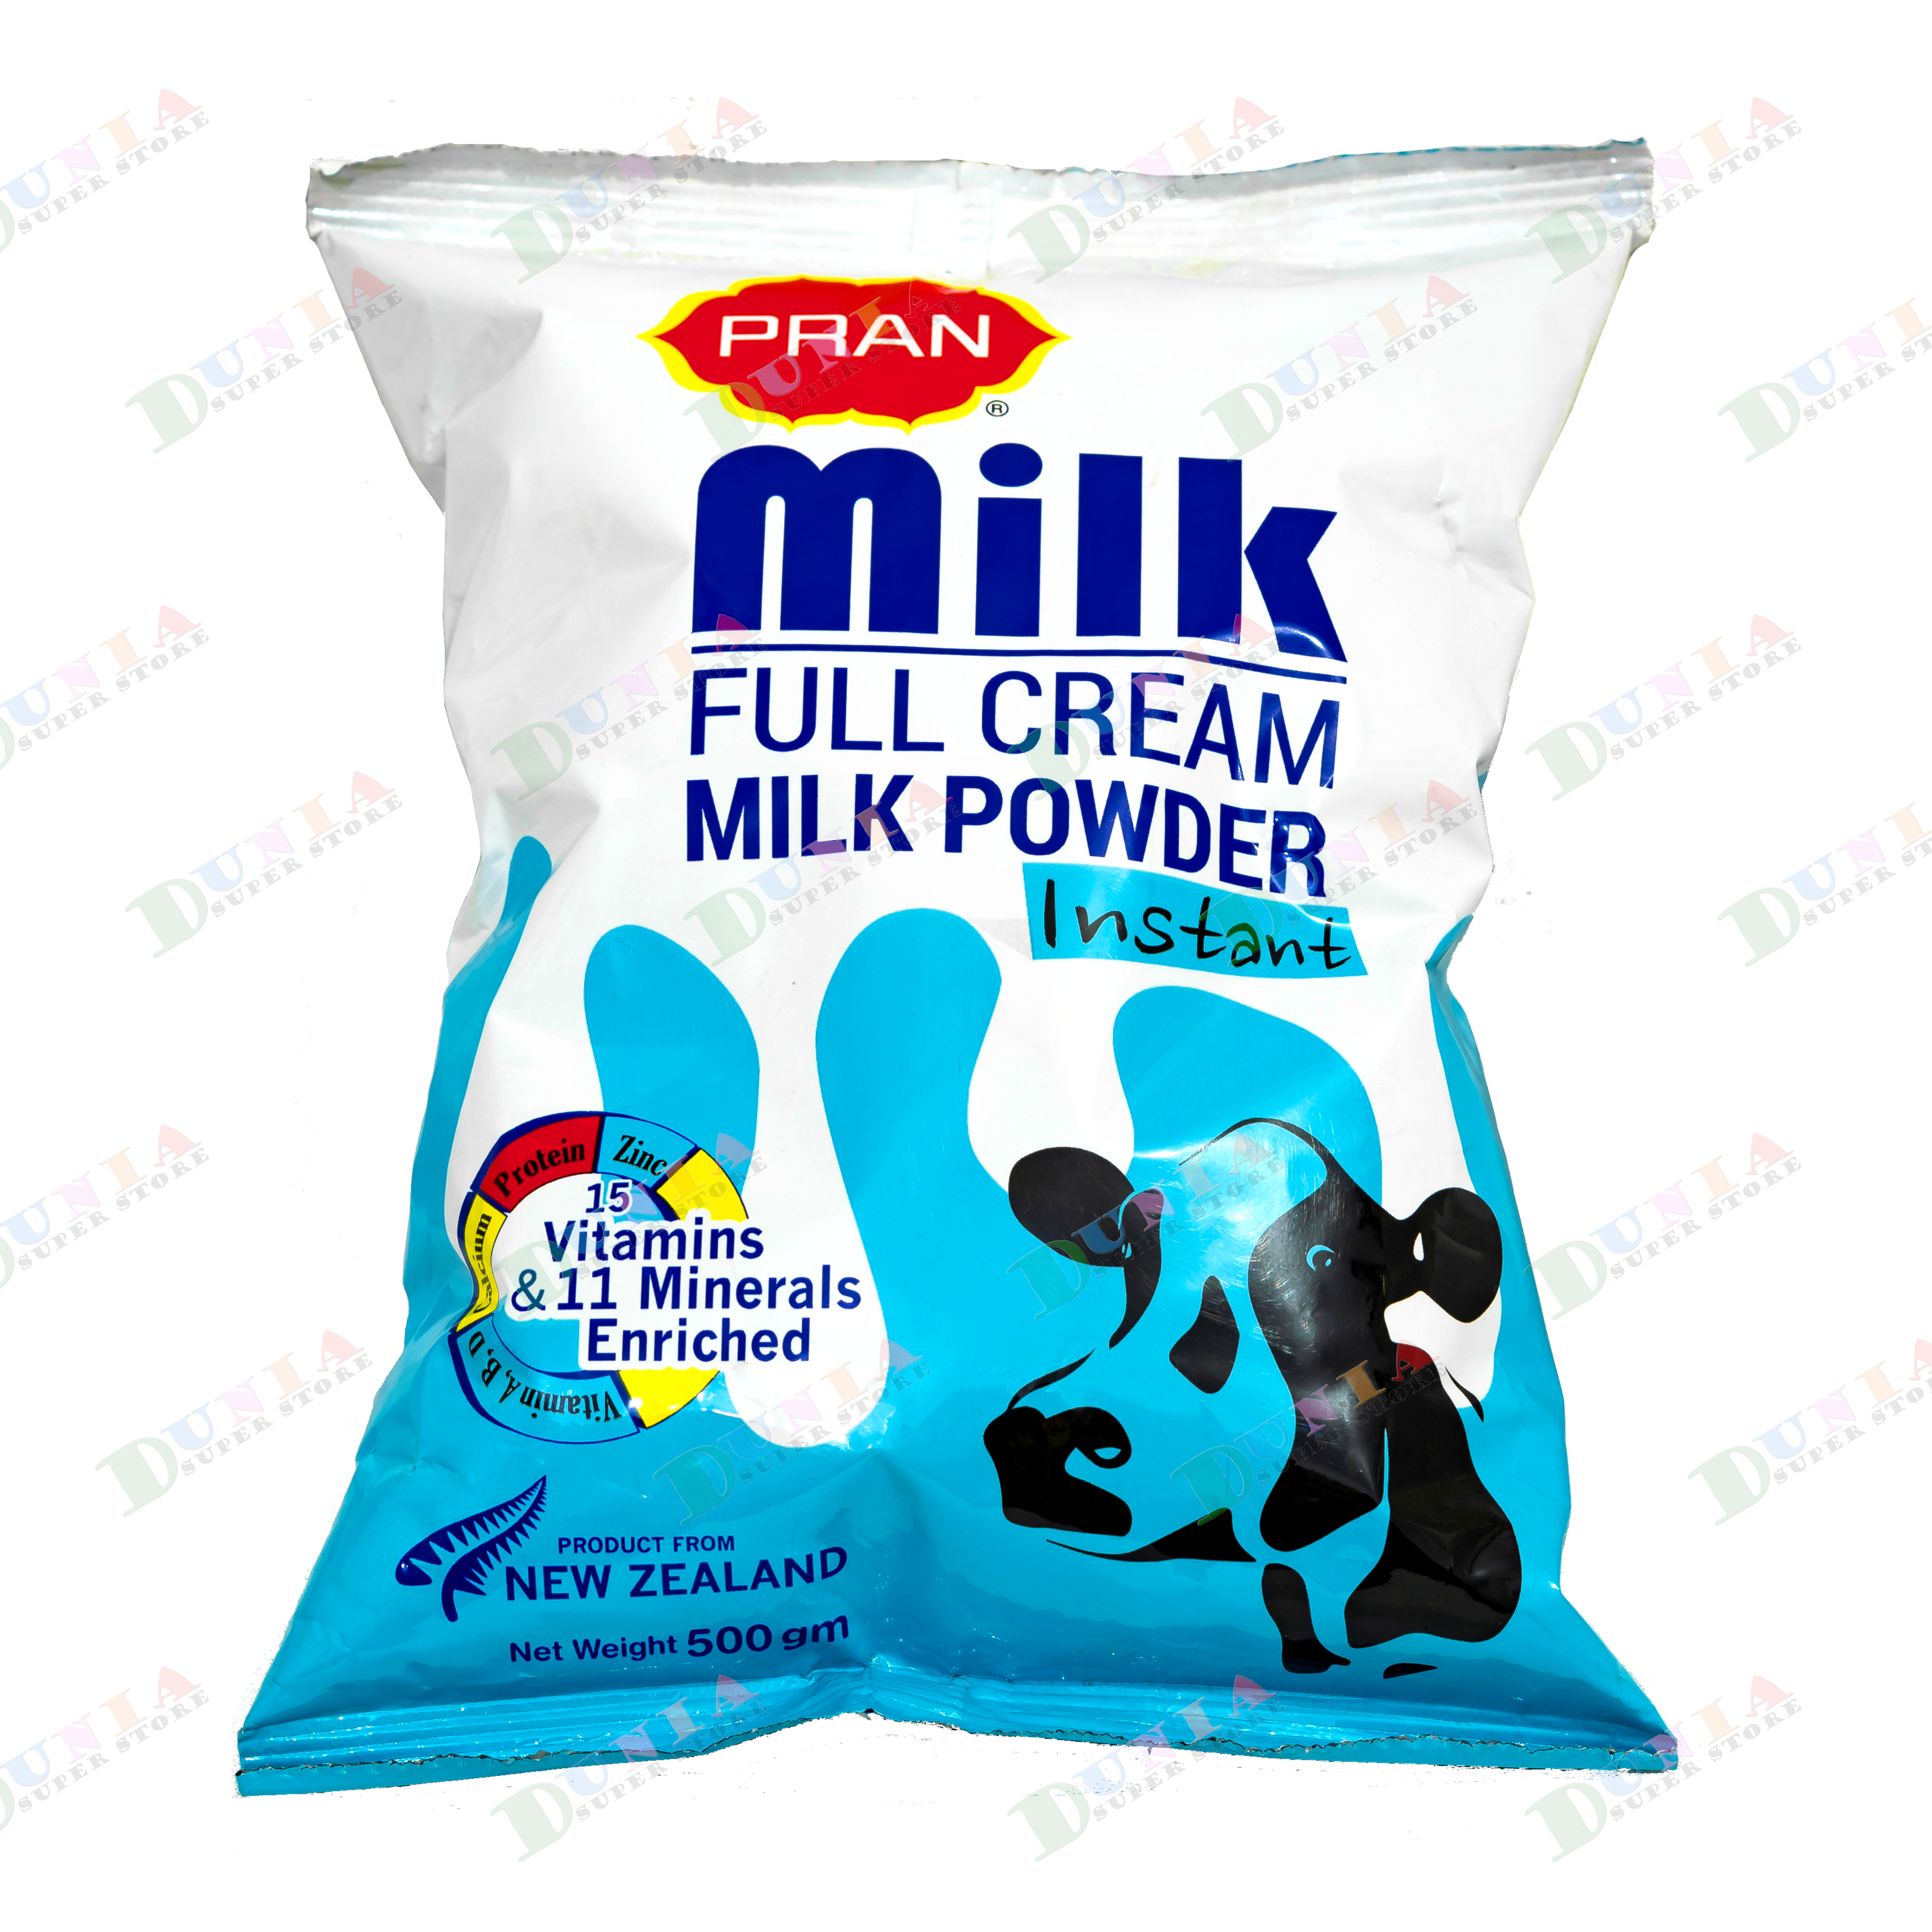 PRAN Instant Full Cream Milk Powder (15 Vitamins & 11 Minerals Enriched) Product from New Zealand 500g